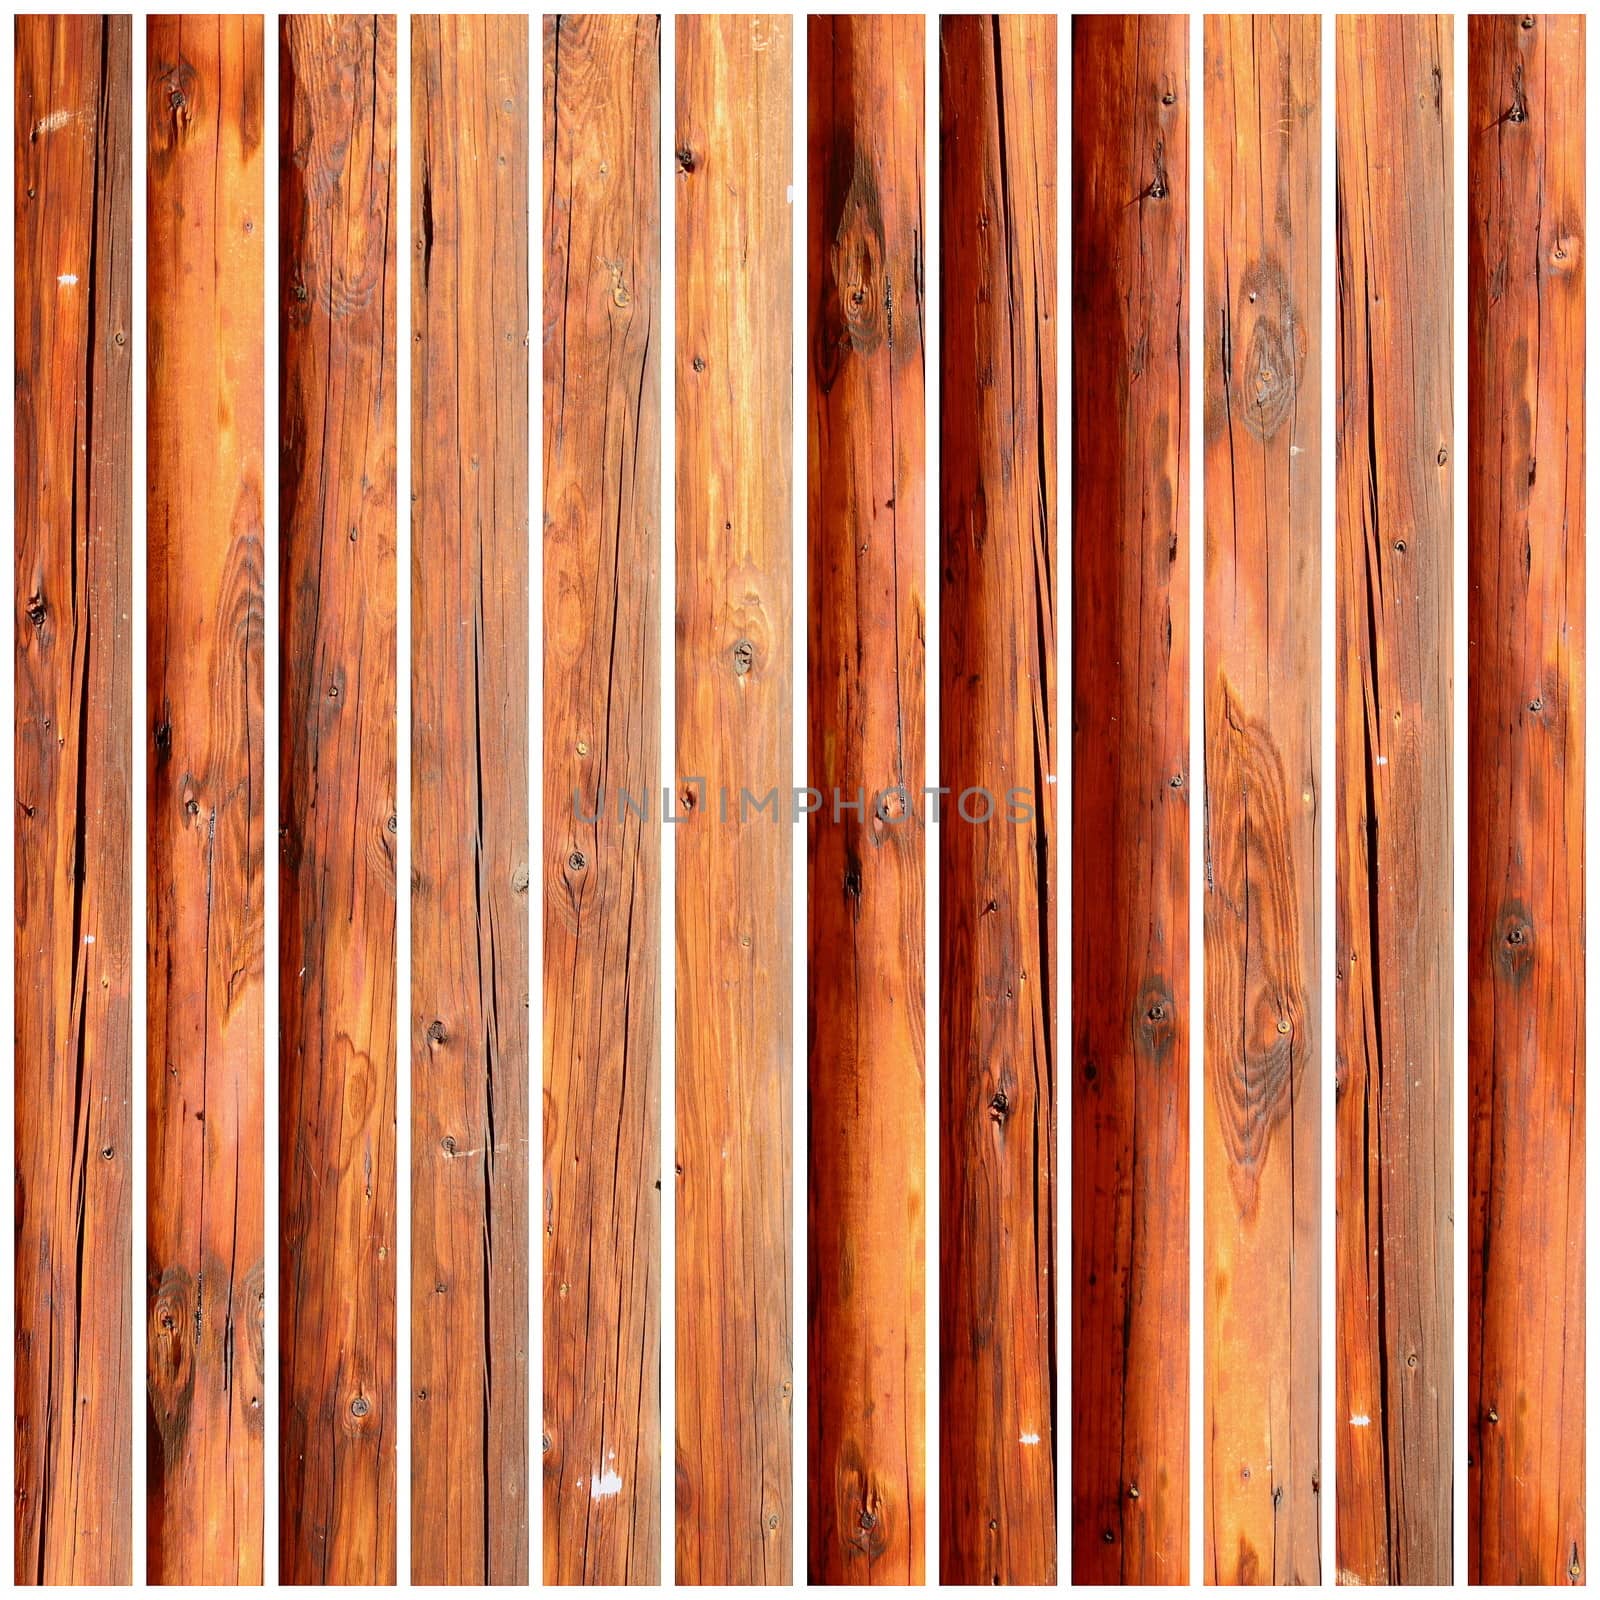 grungy wooden tiles by taviphoto